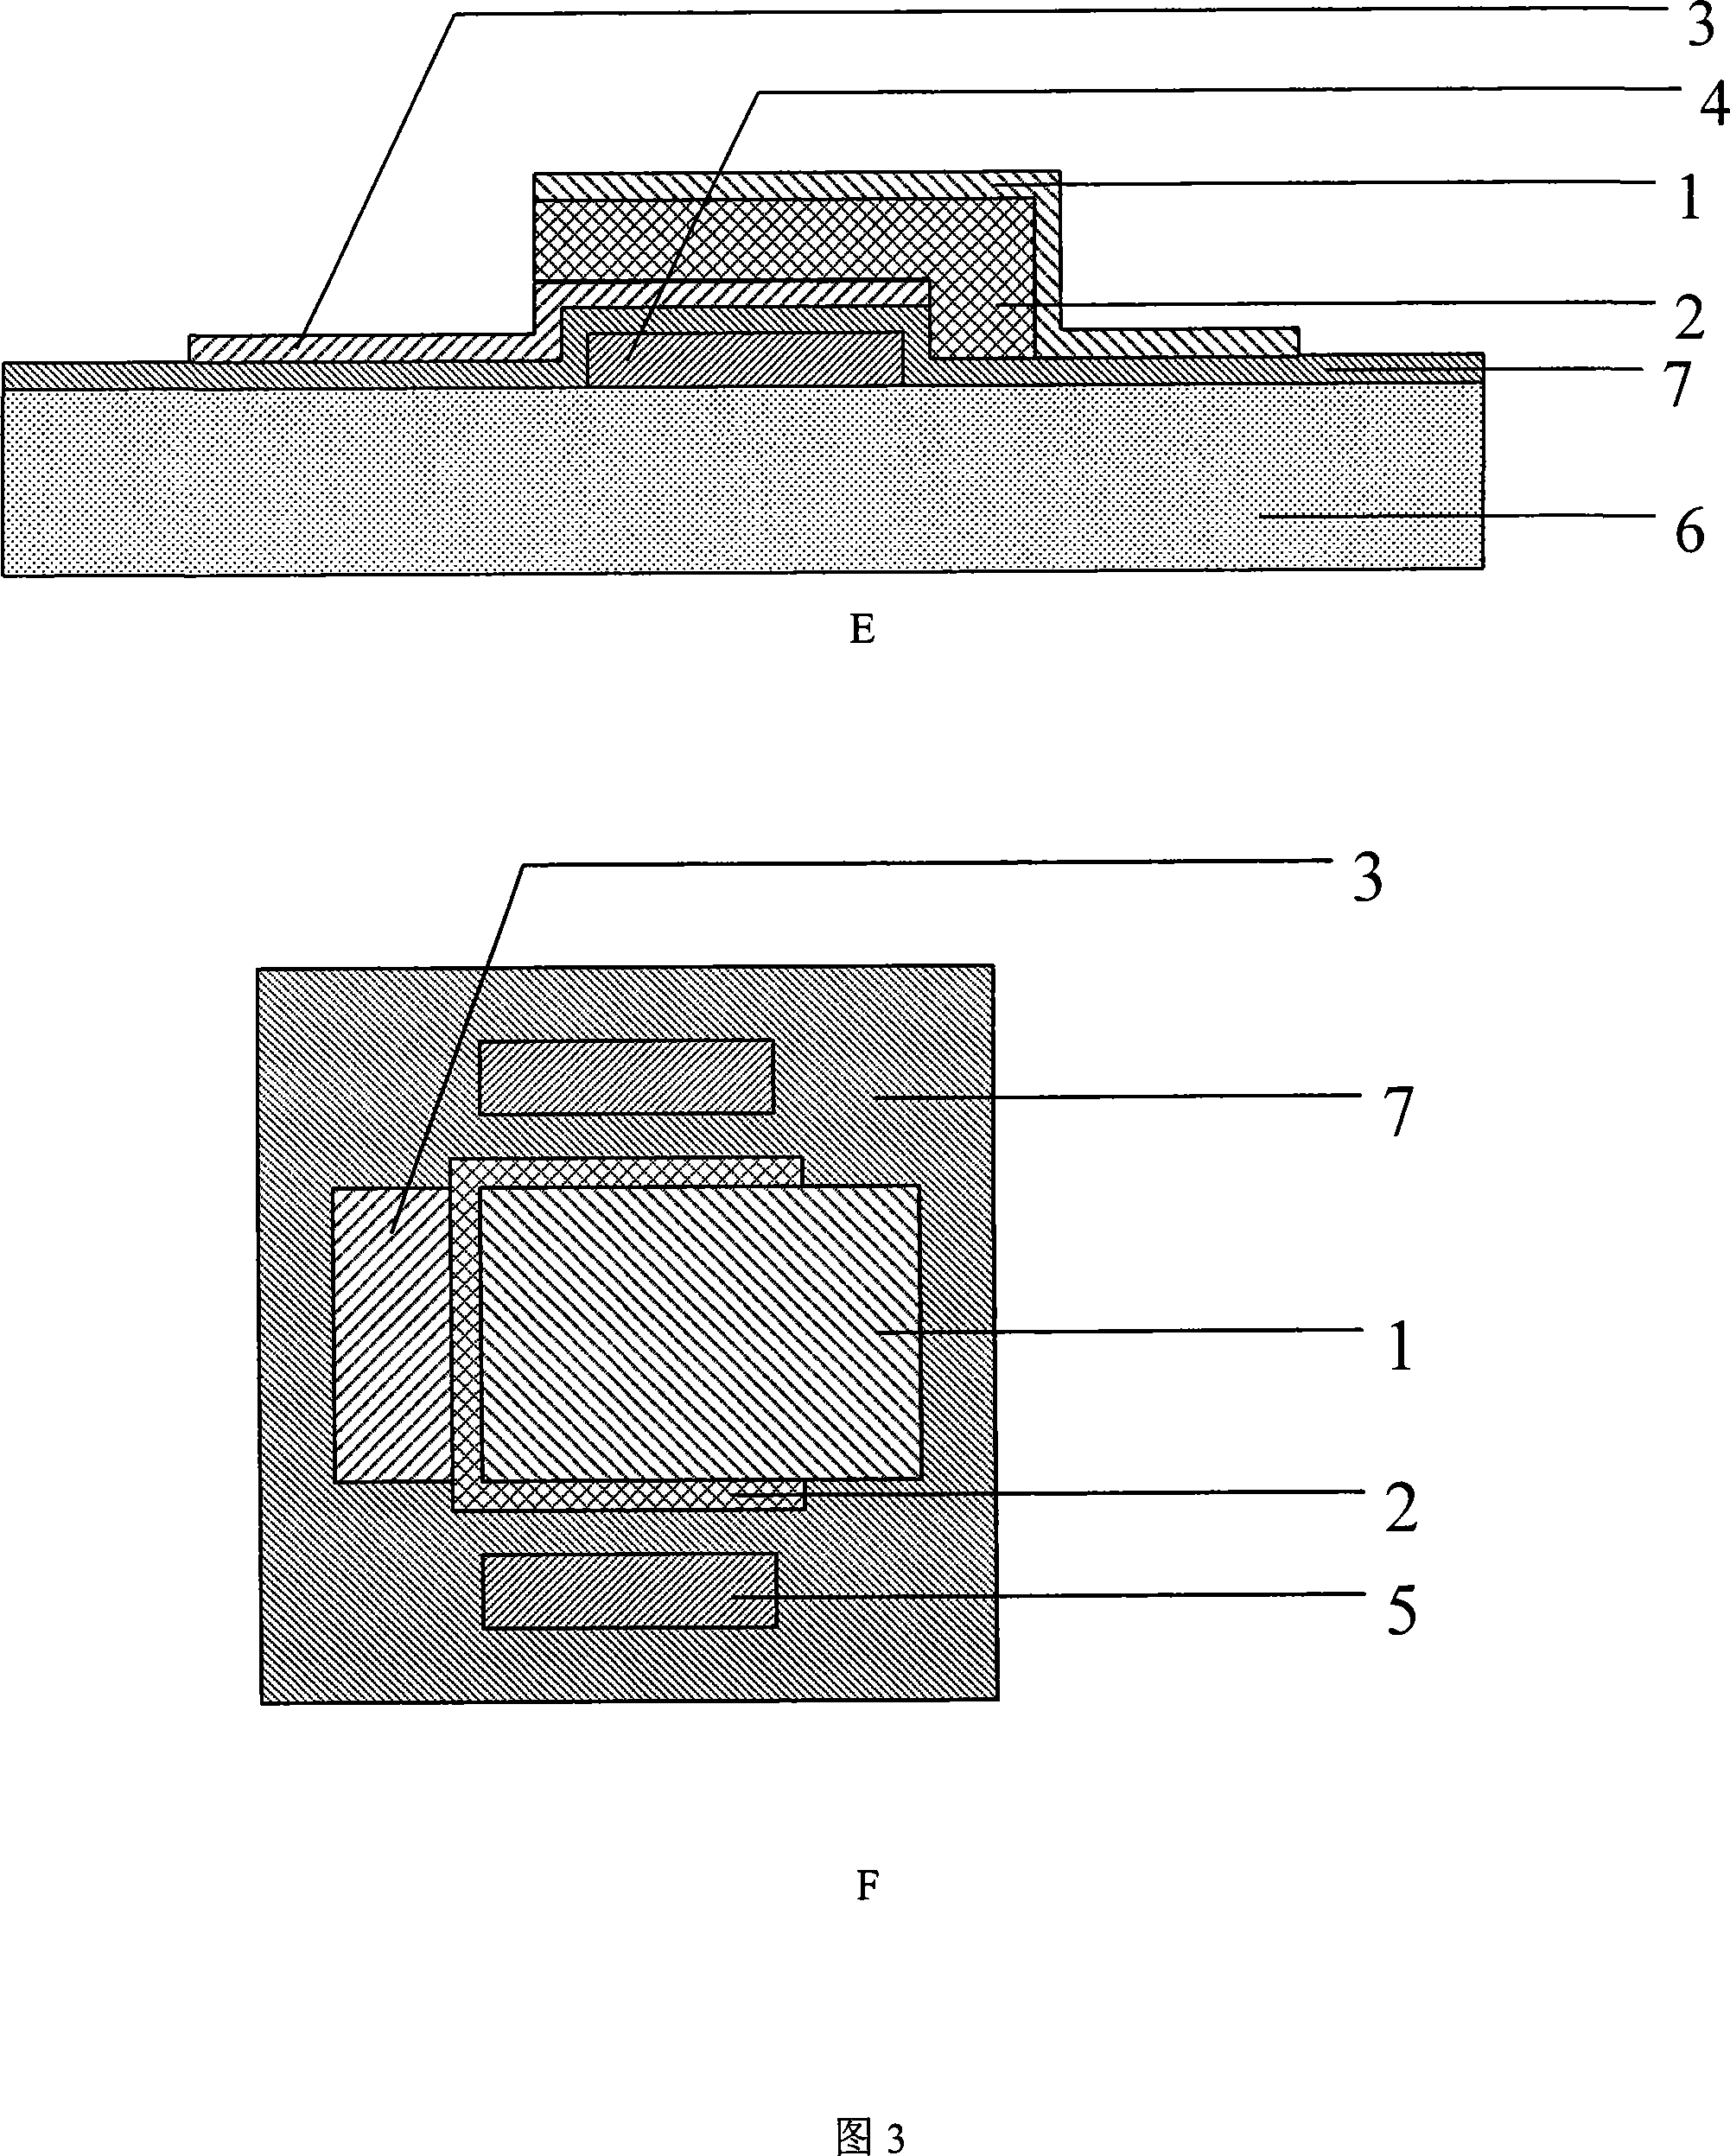 A novel acoustic wave syntonizer and the corresponding preparation method